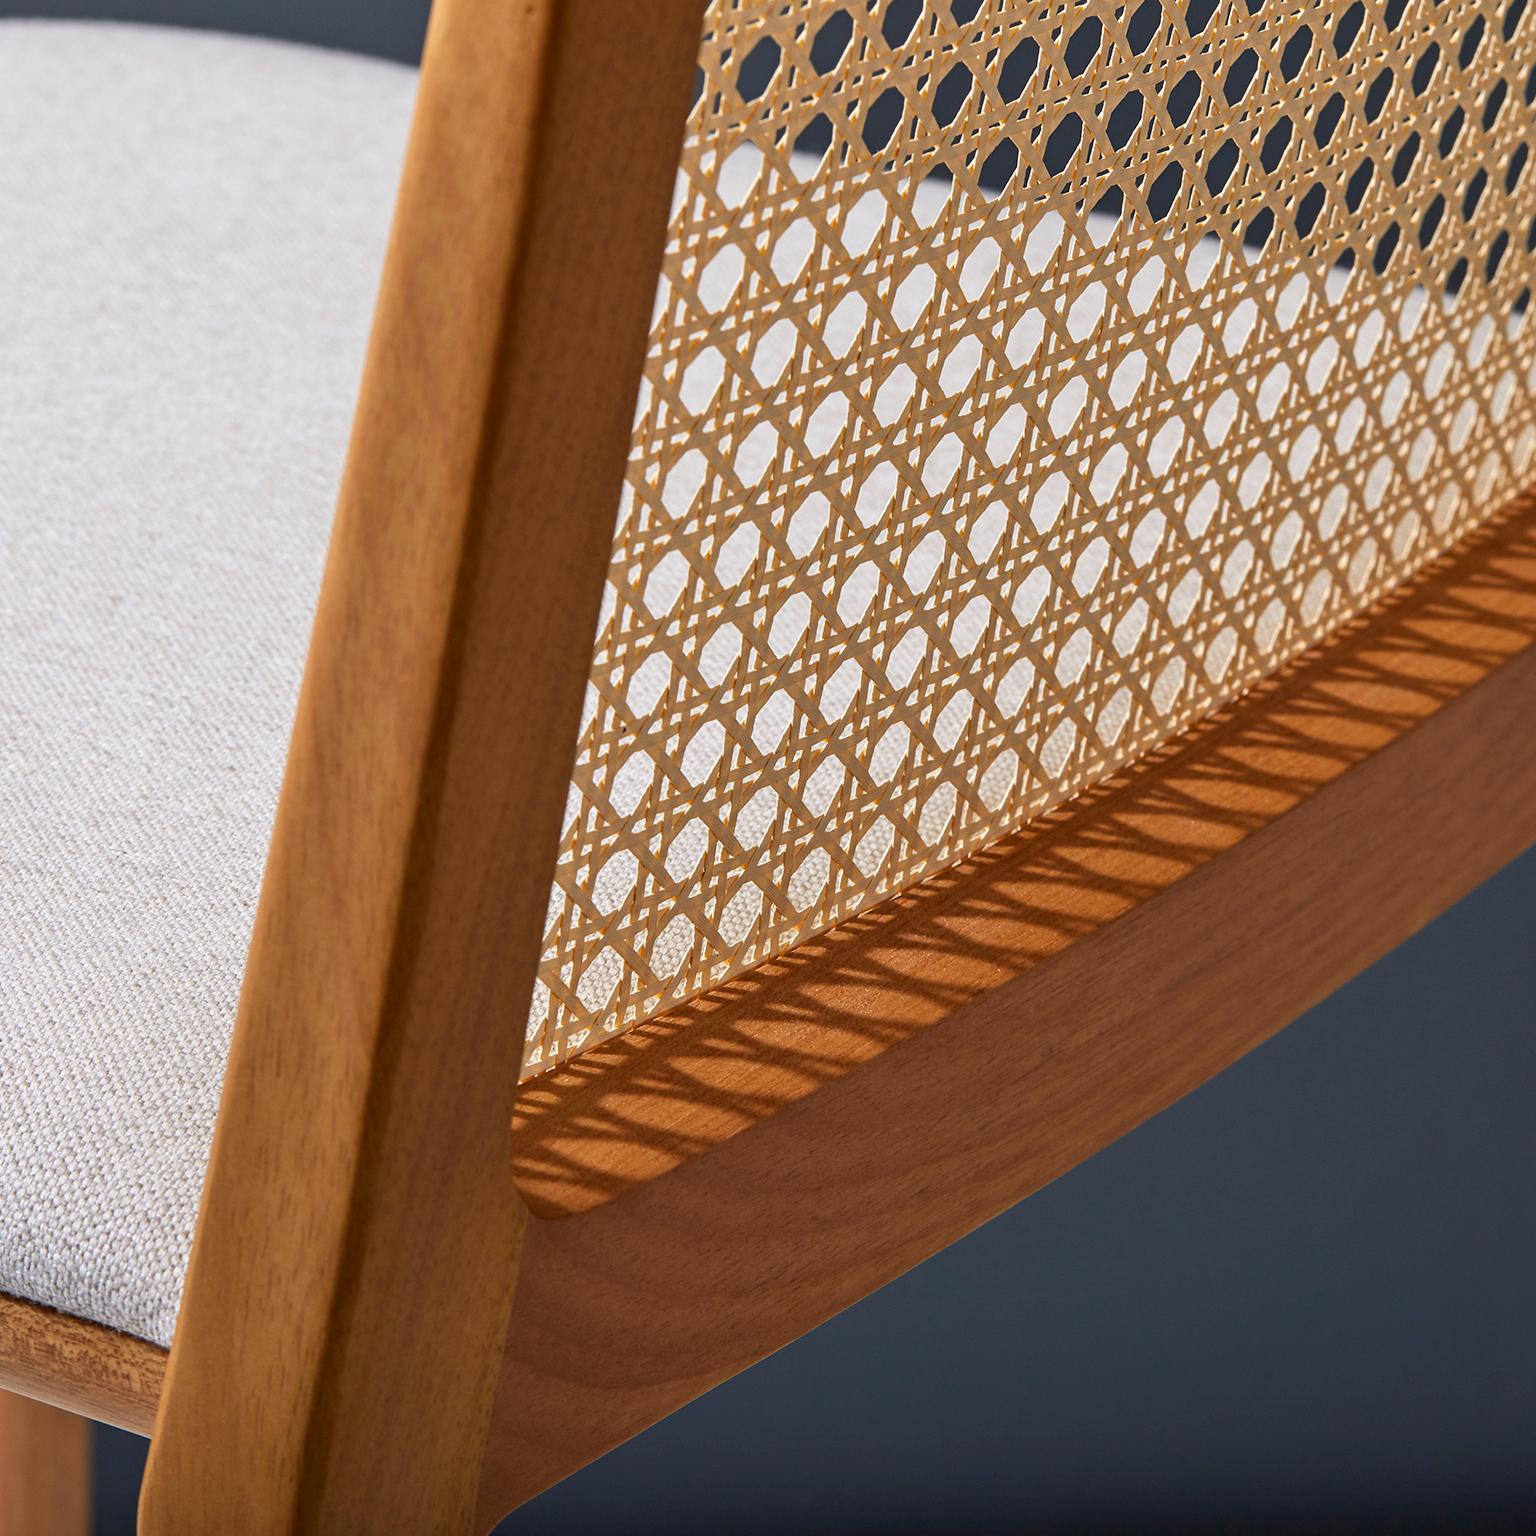 Contemporary Minimal style, solid wood chair, textiles or leather seatings, caning backboard For Sale